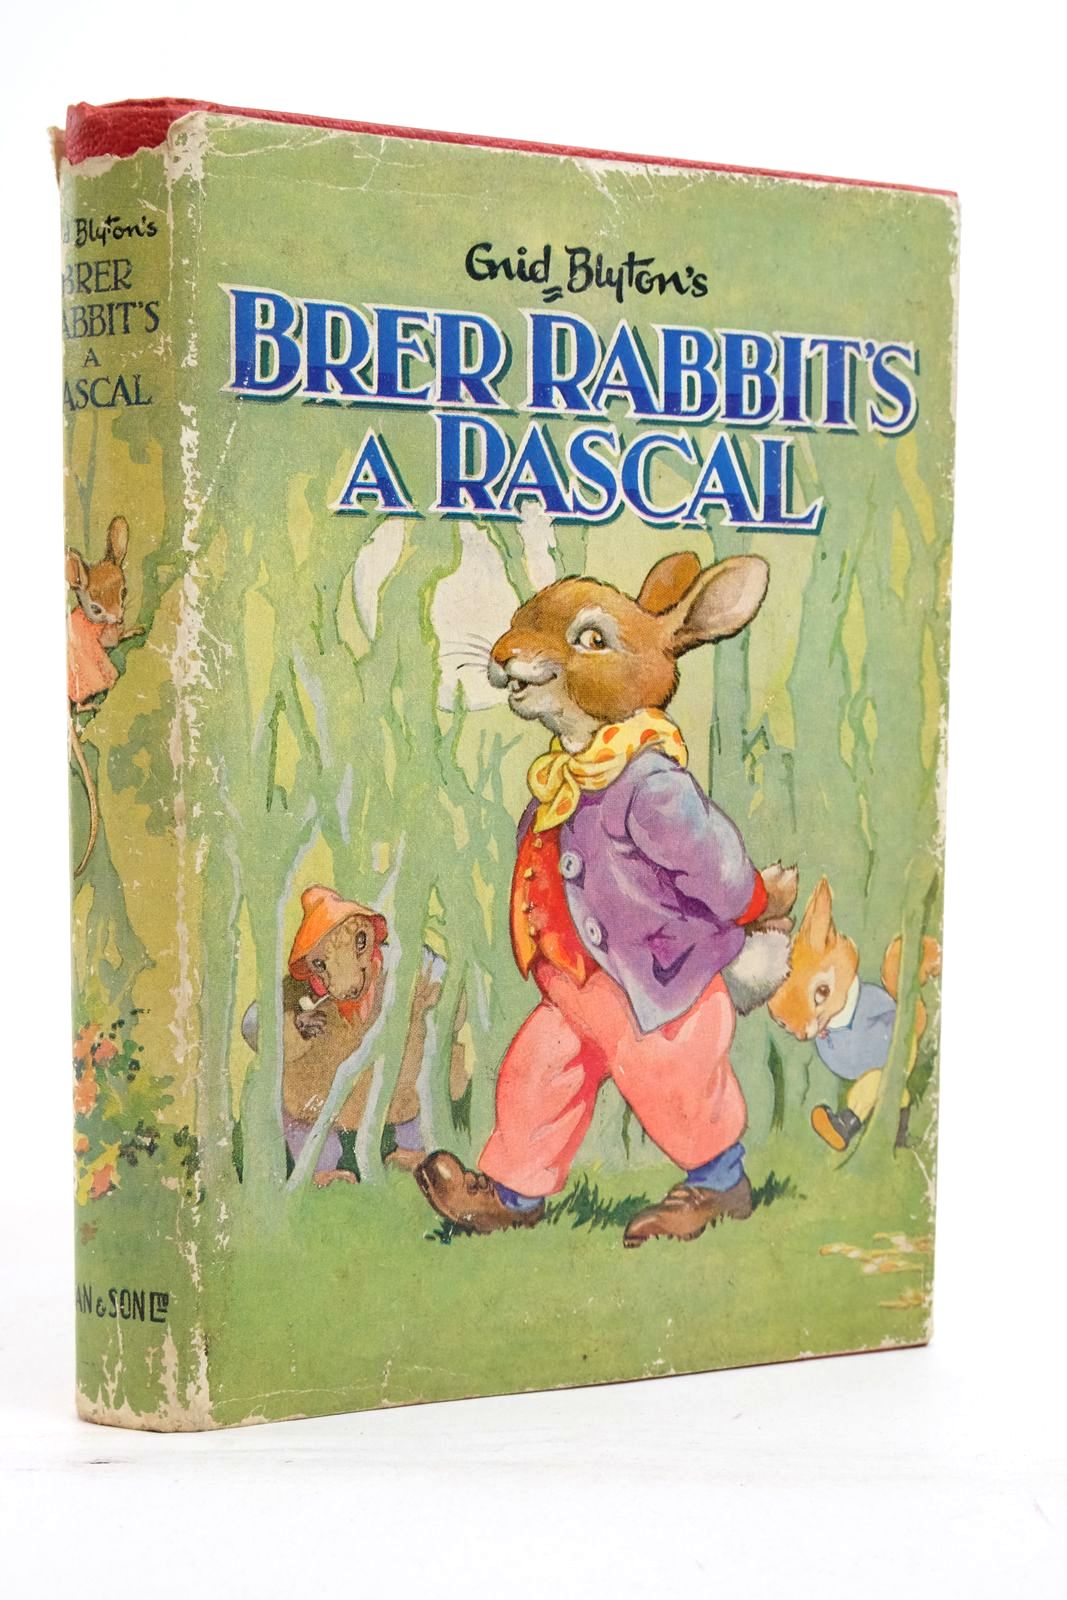 Photo of BRER RABBIT'S A RASCAL written by Blyton, Enid illustrated by Lodge, Grace published by Dean & Son Ltd. (STOCK CODE: 2137955)  for sale by Stella & Rose's Books